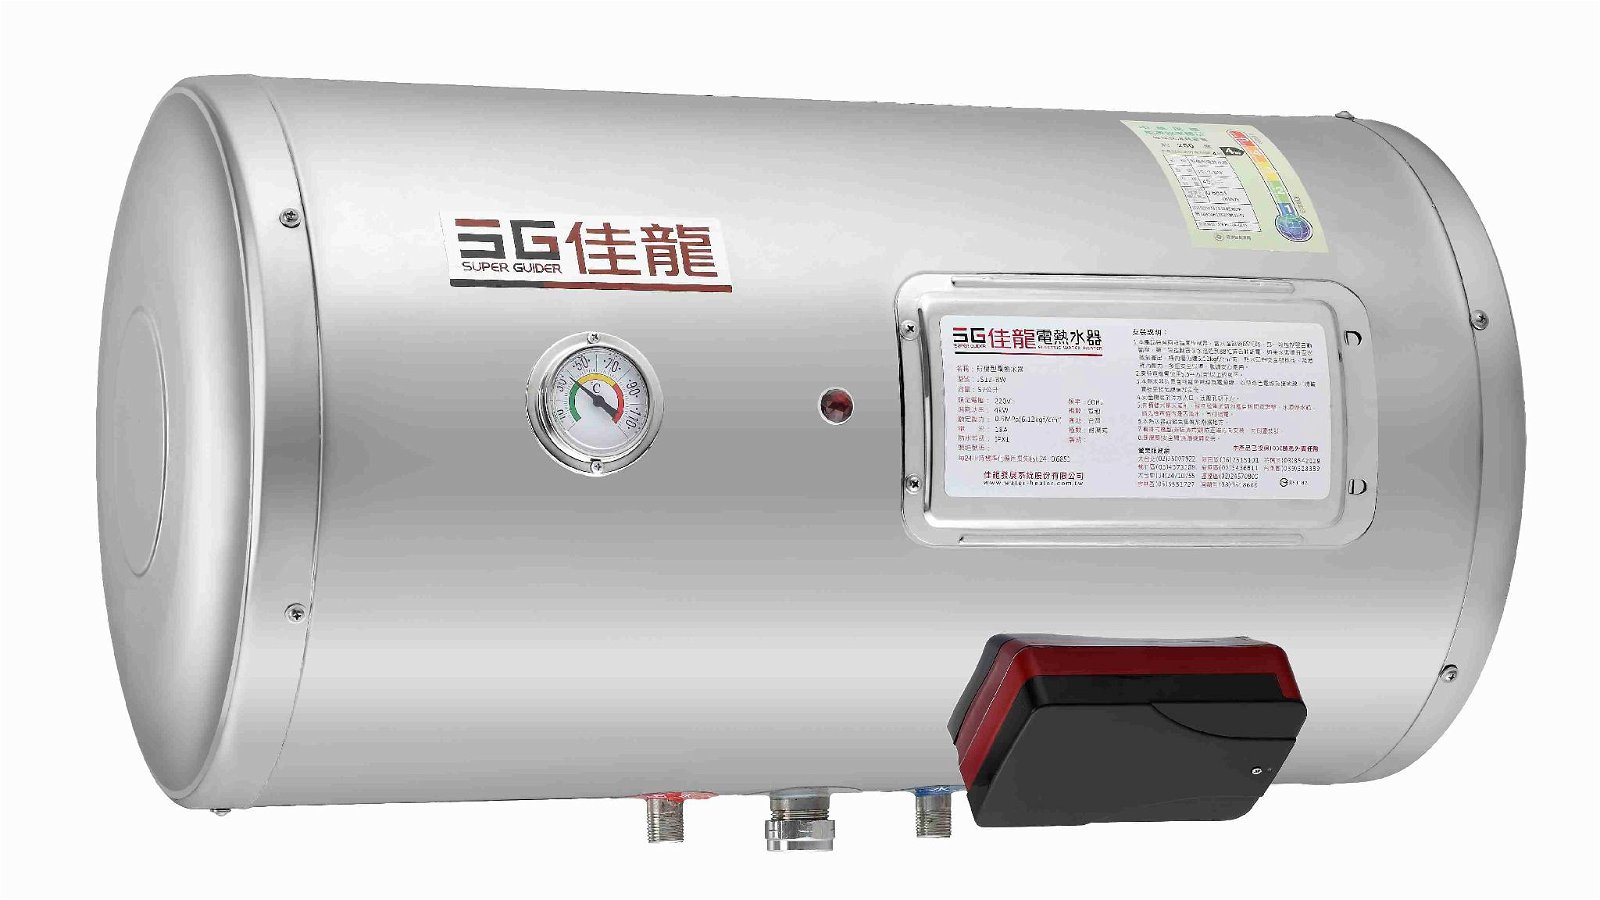 Super Guider Electric Water Heater Horizontal-Wall Series JS8-BW